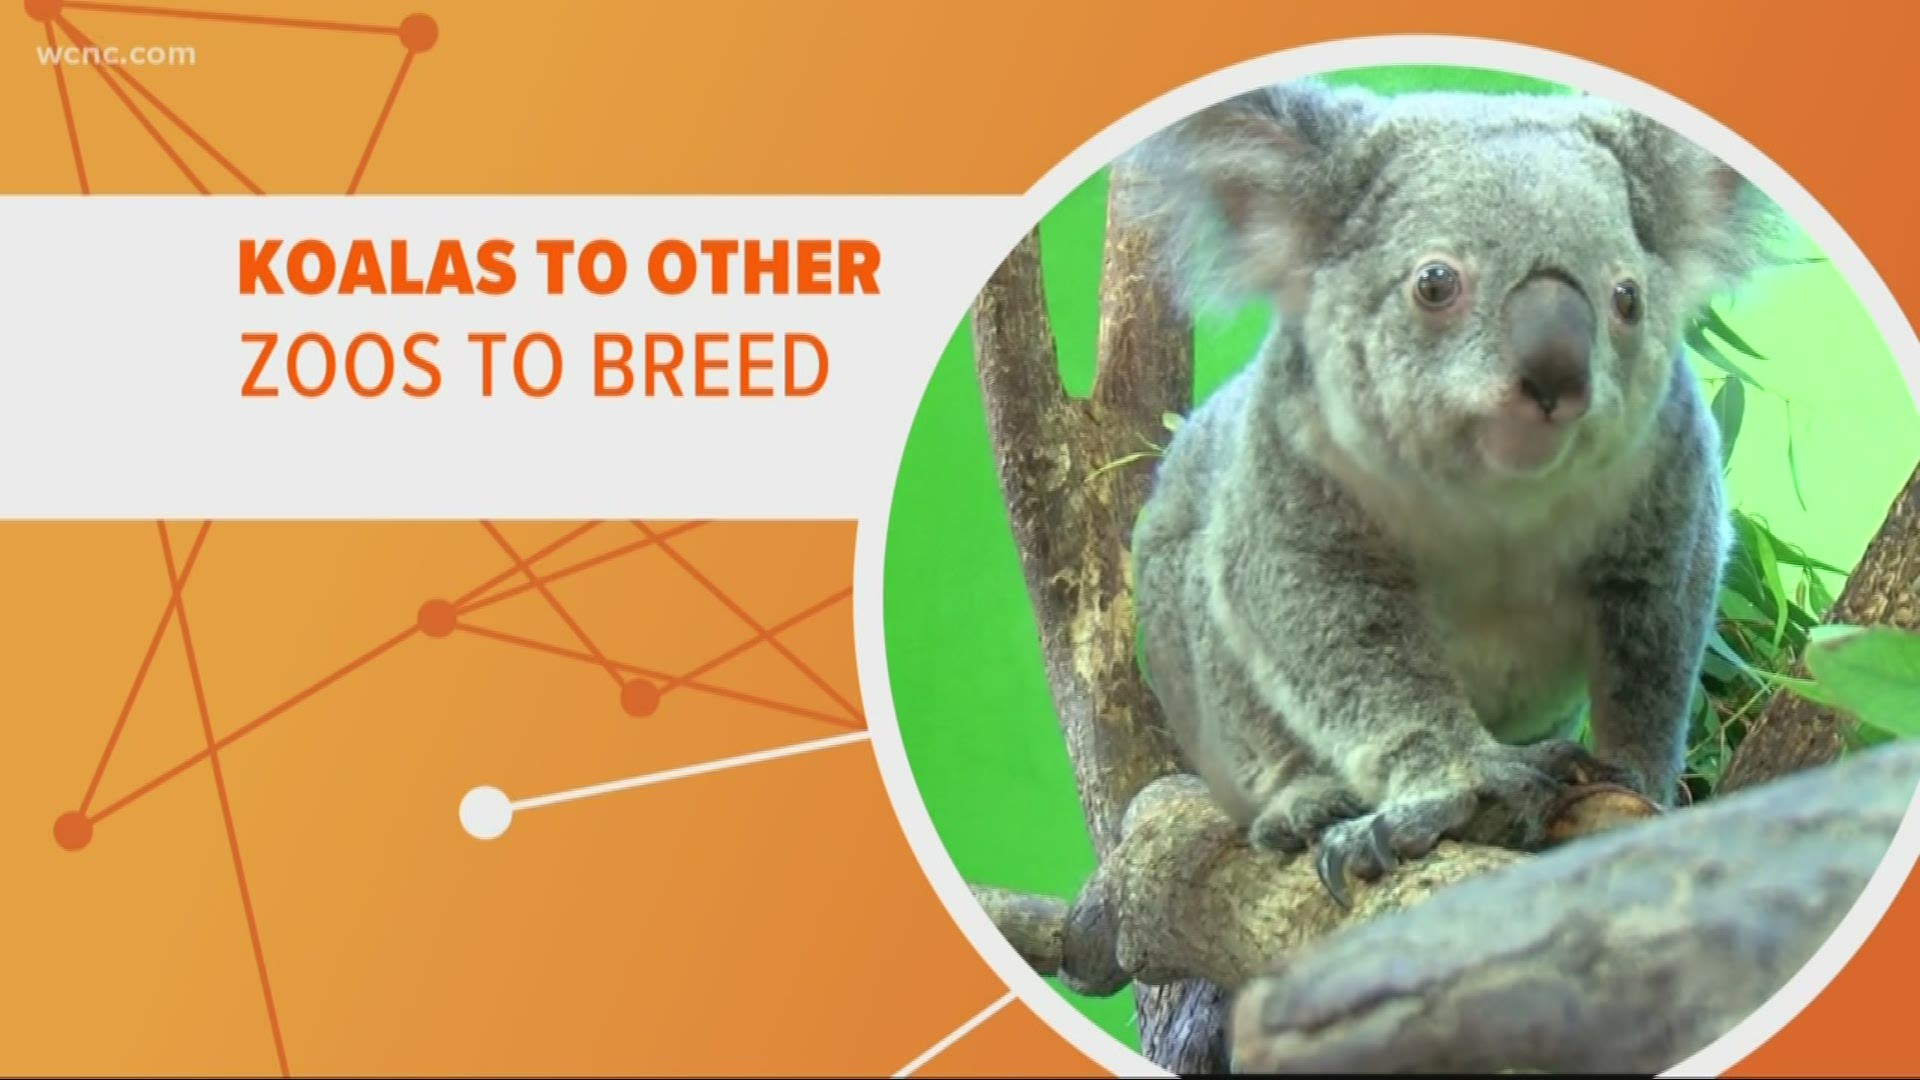 Wildfires continue to rage in Australia, where officials estimate over 1 billion animals have died. That's why breeding programs at zoos are more important than ever